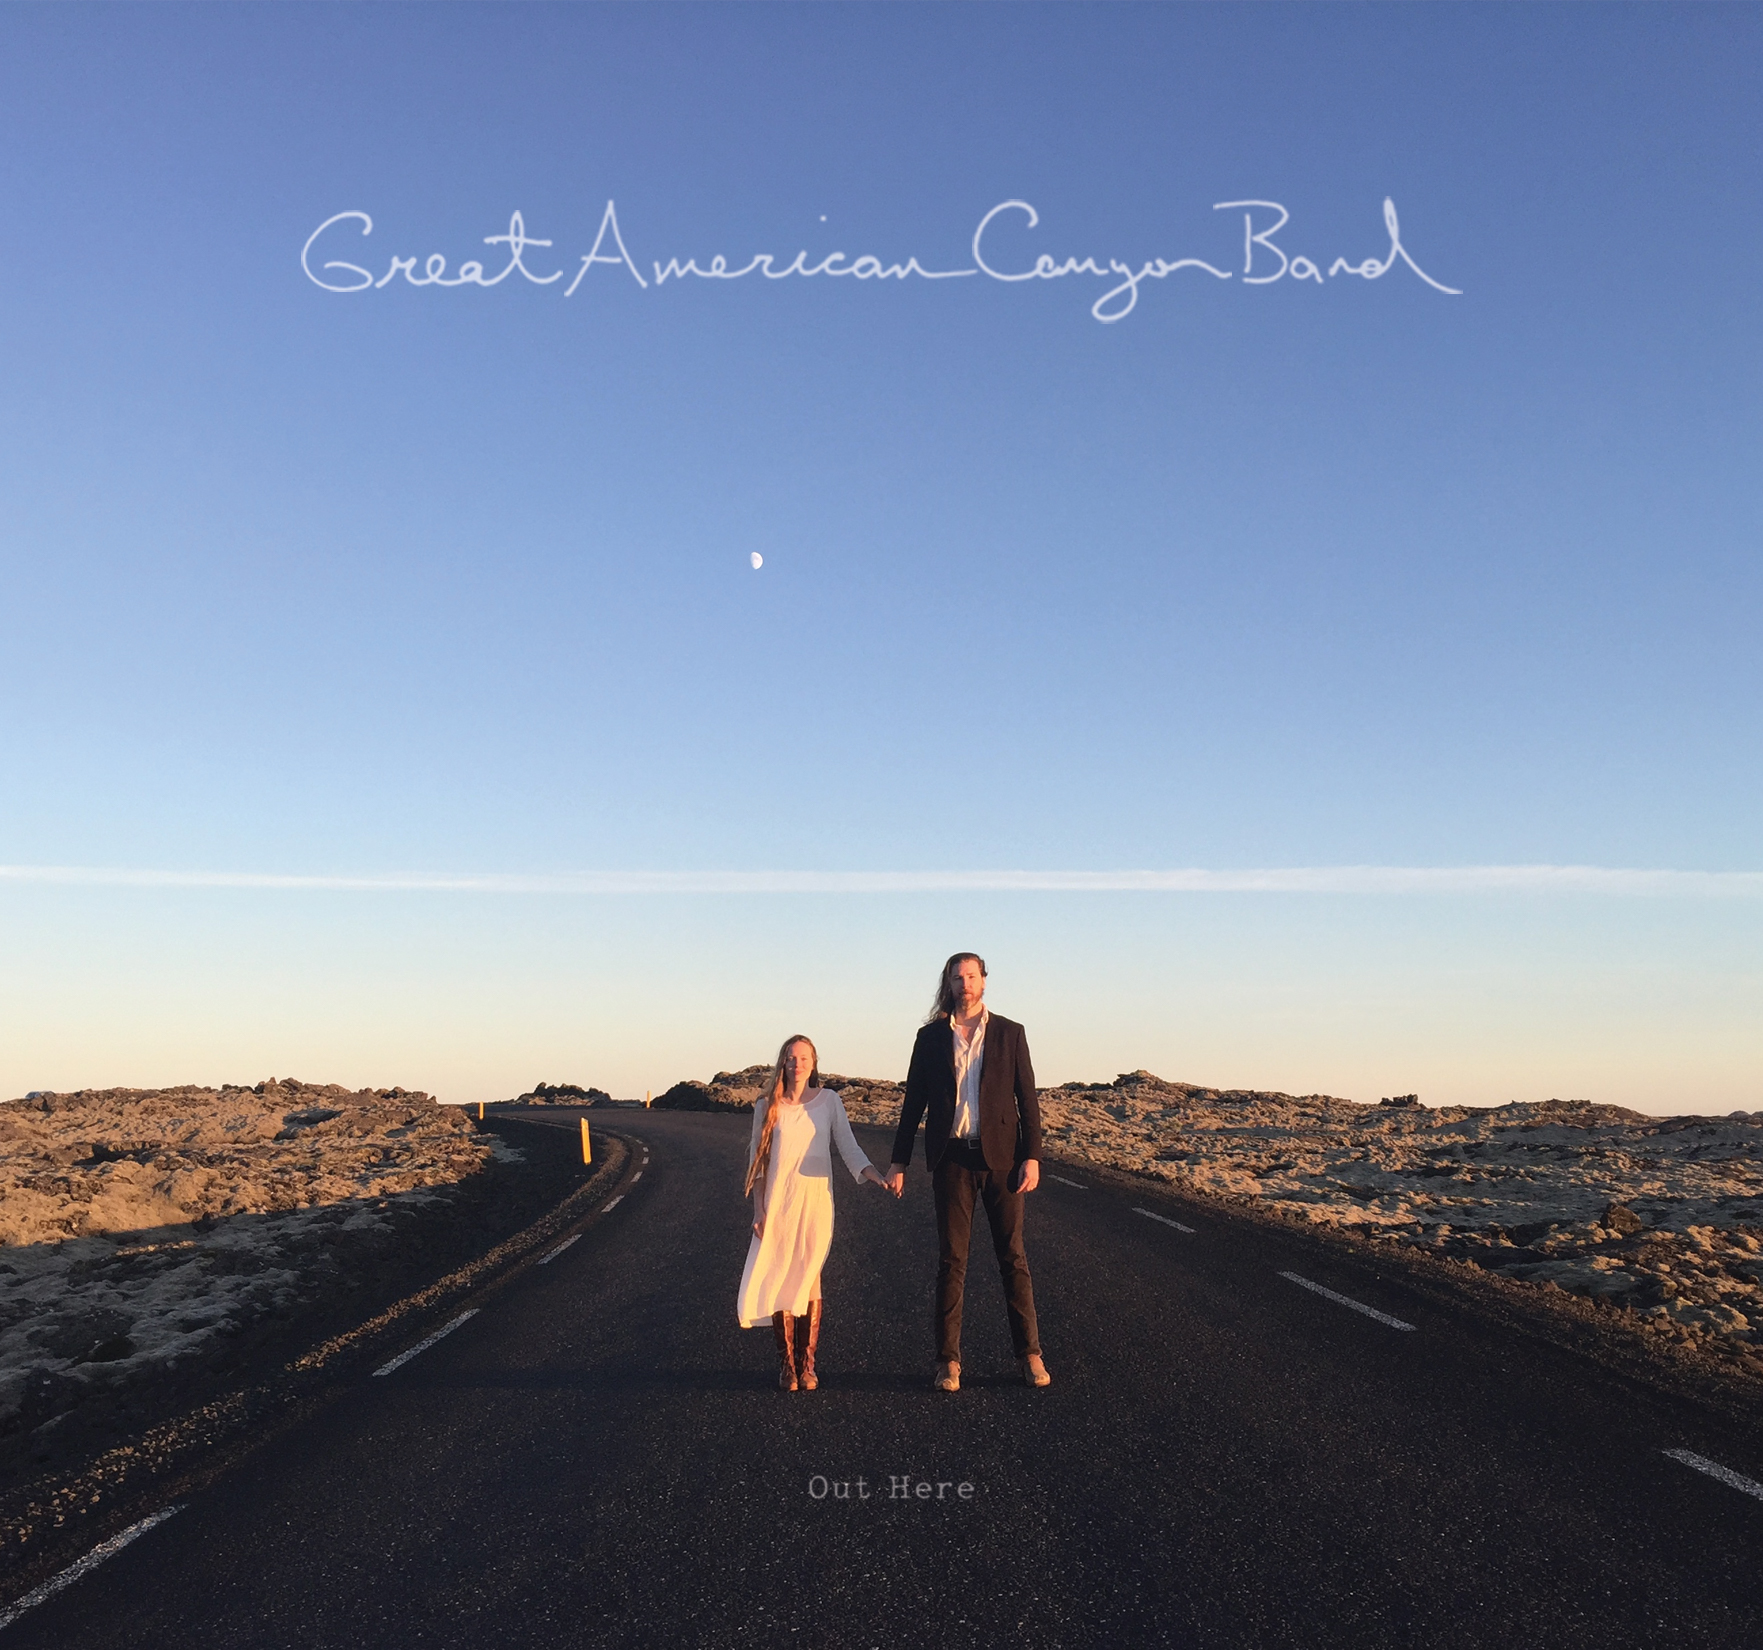 Great American Canyon Band – Out Here EP